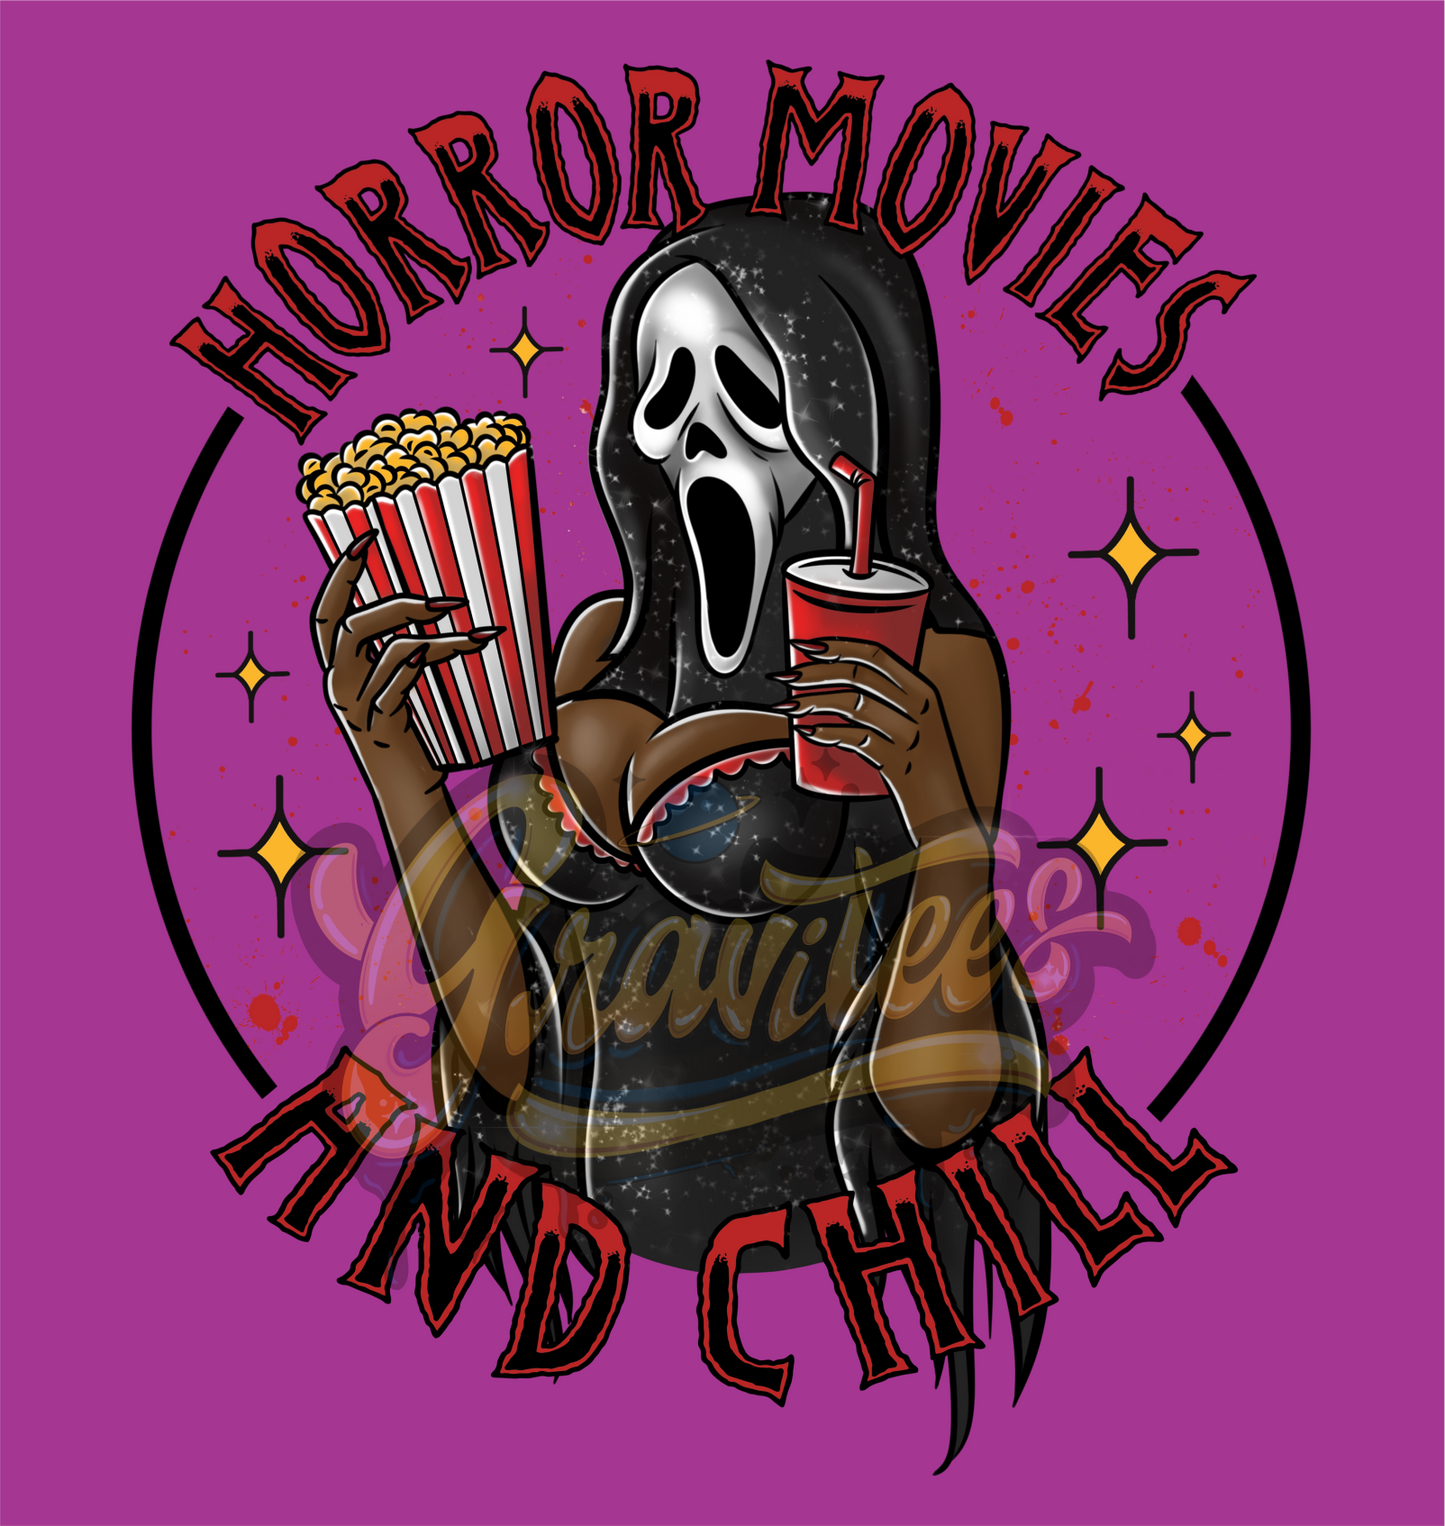 Horror Movies and Chill Clipart, Dark Skin Tone, Horror Clipart, Horror Clipart, Scream Clipart for DTF or Shirt Printing, PNG Only!